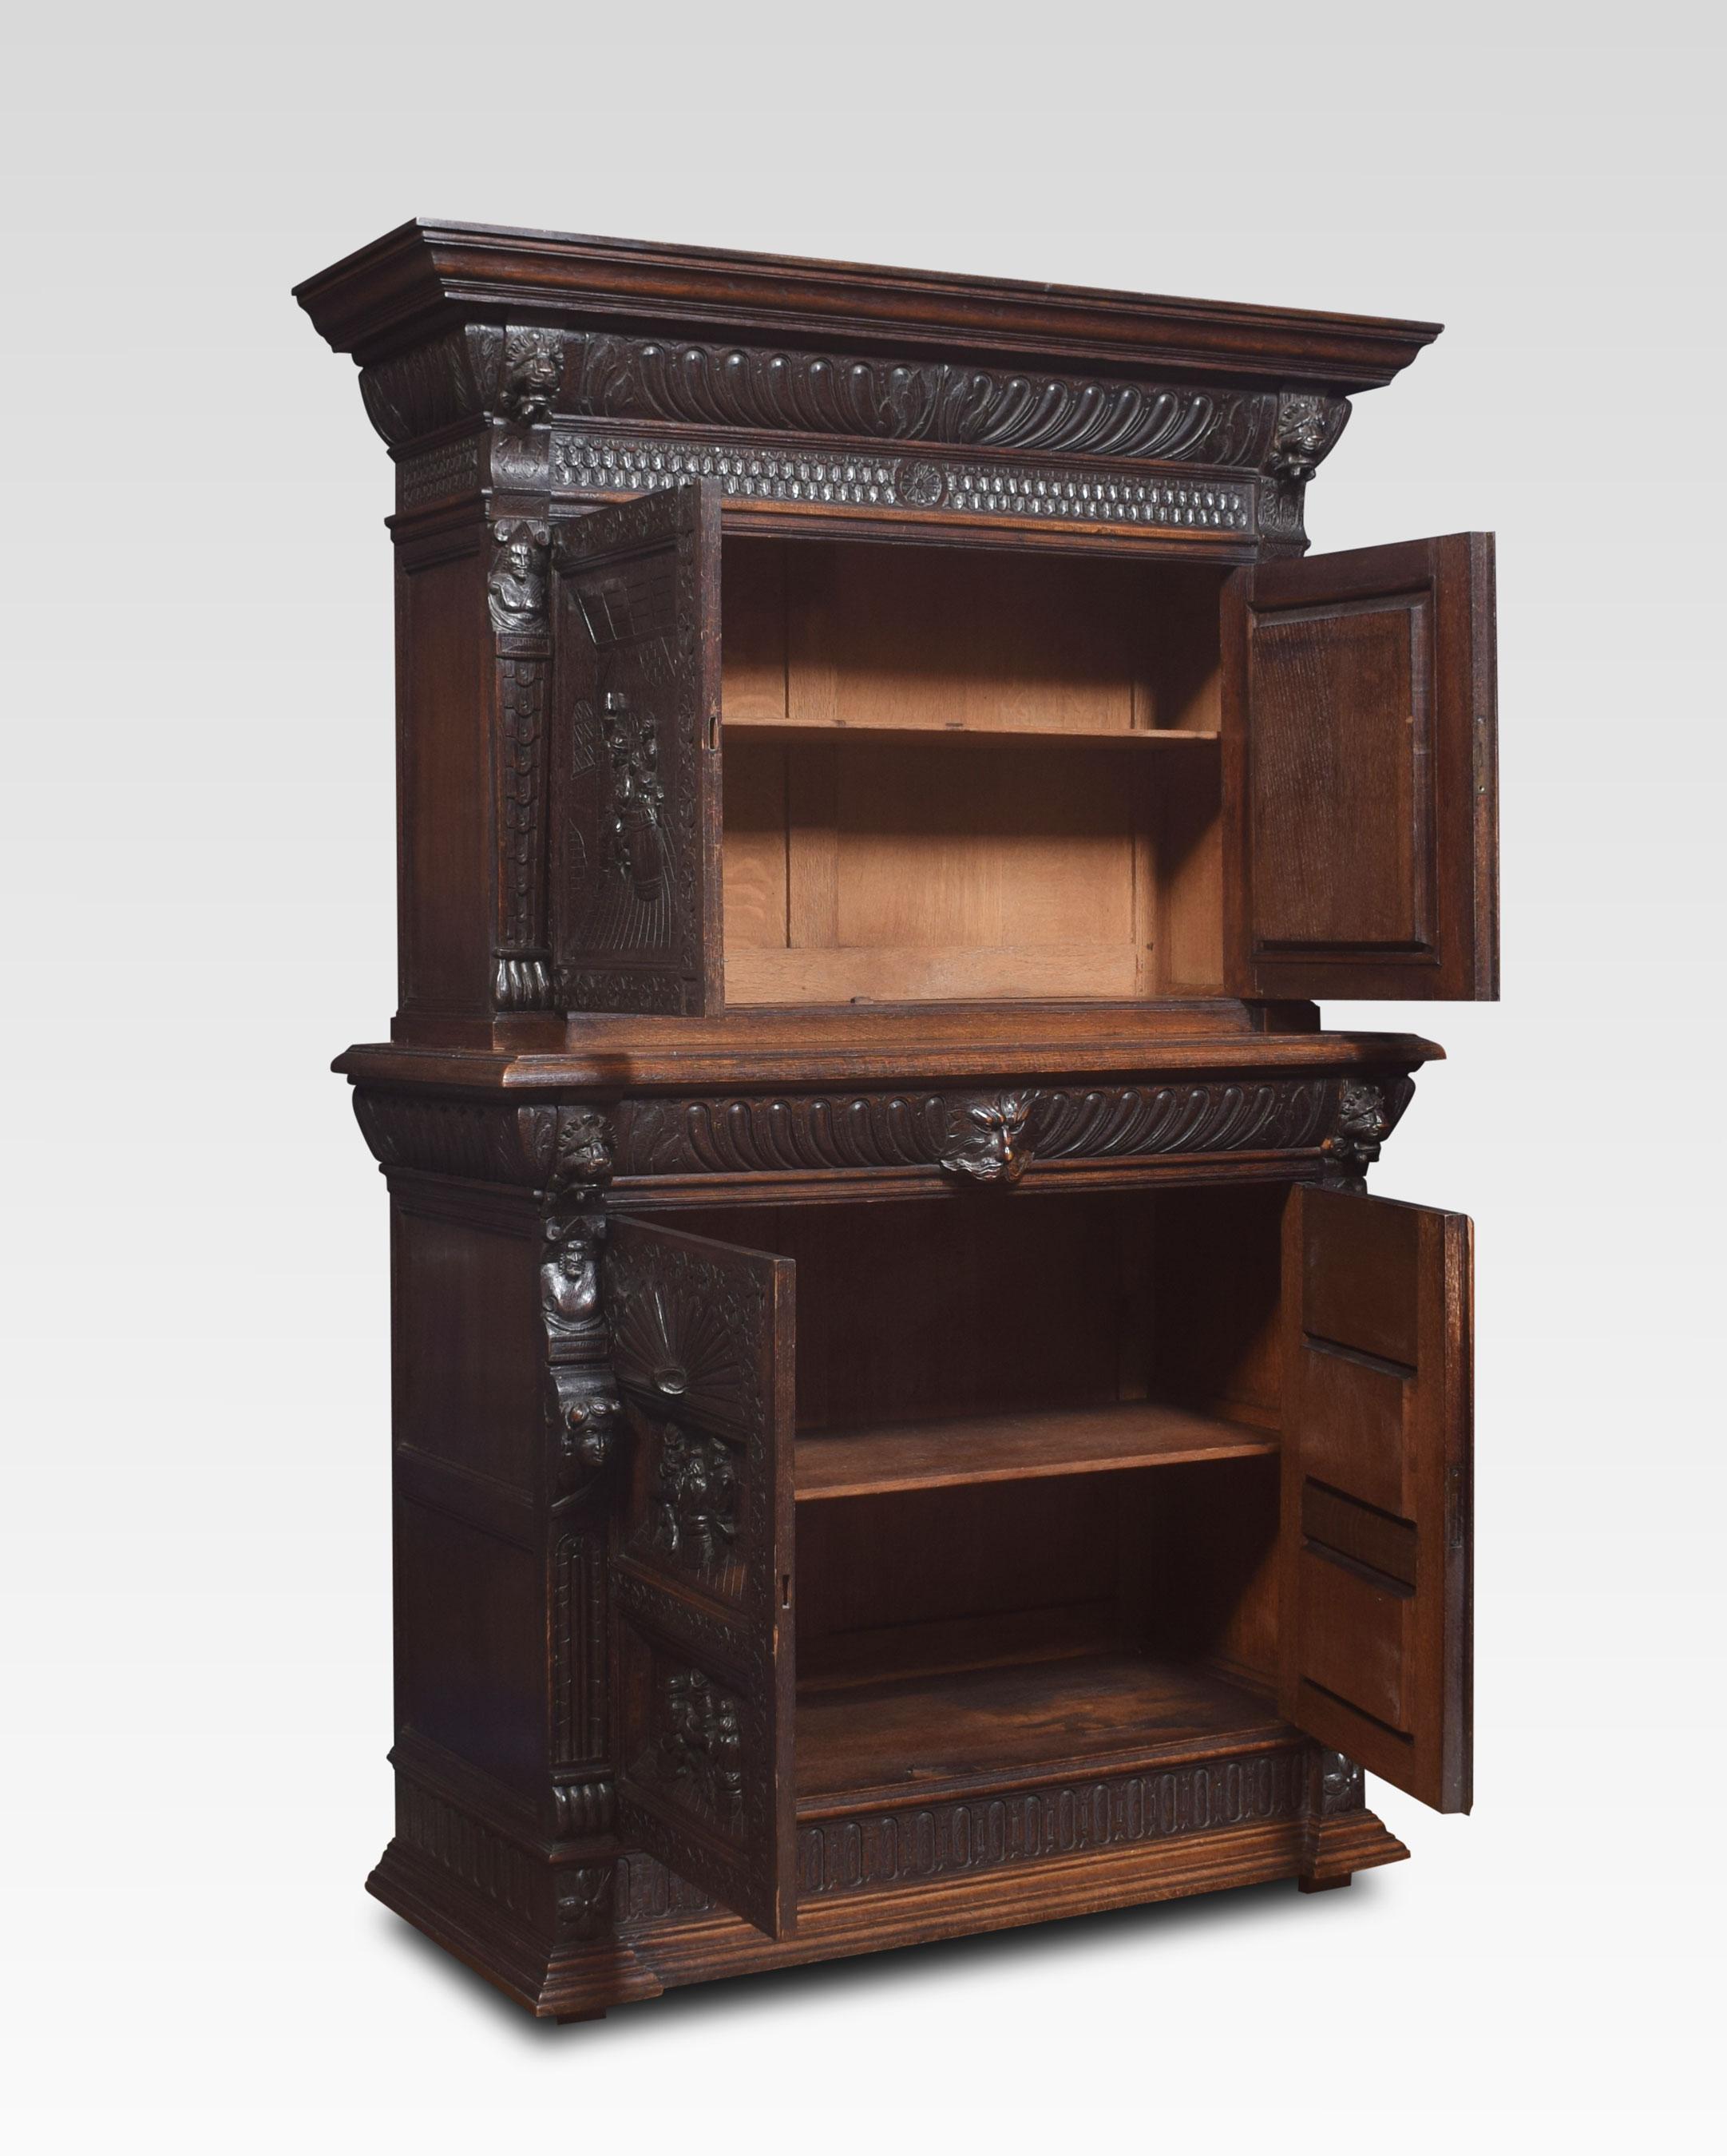 Flemish carved oak cupboard, the projecting corning over two carved panel doors depicting tavern scenes opening to reveal an adjustable shelved interior. The base section fitted with a drawer with a green man mask and carving above a further pair of